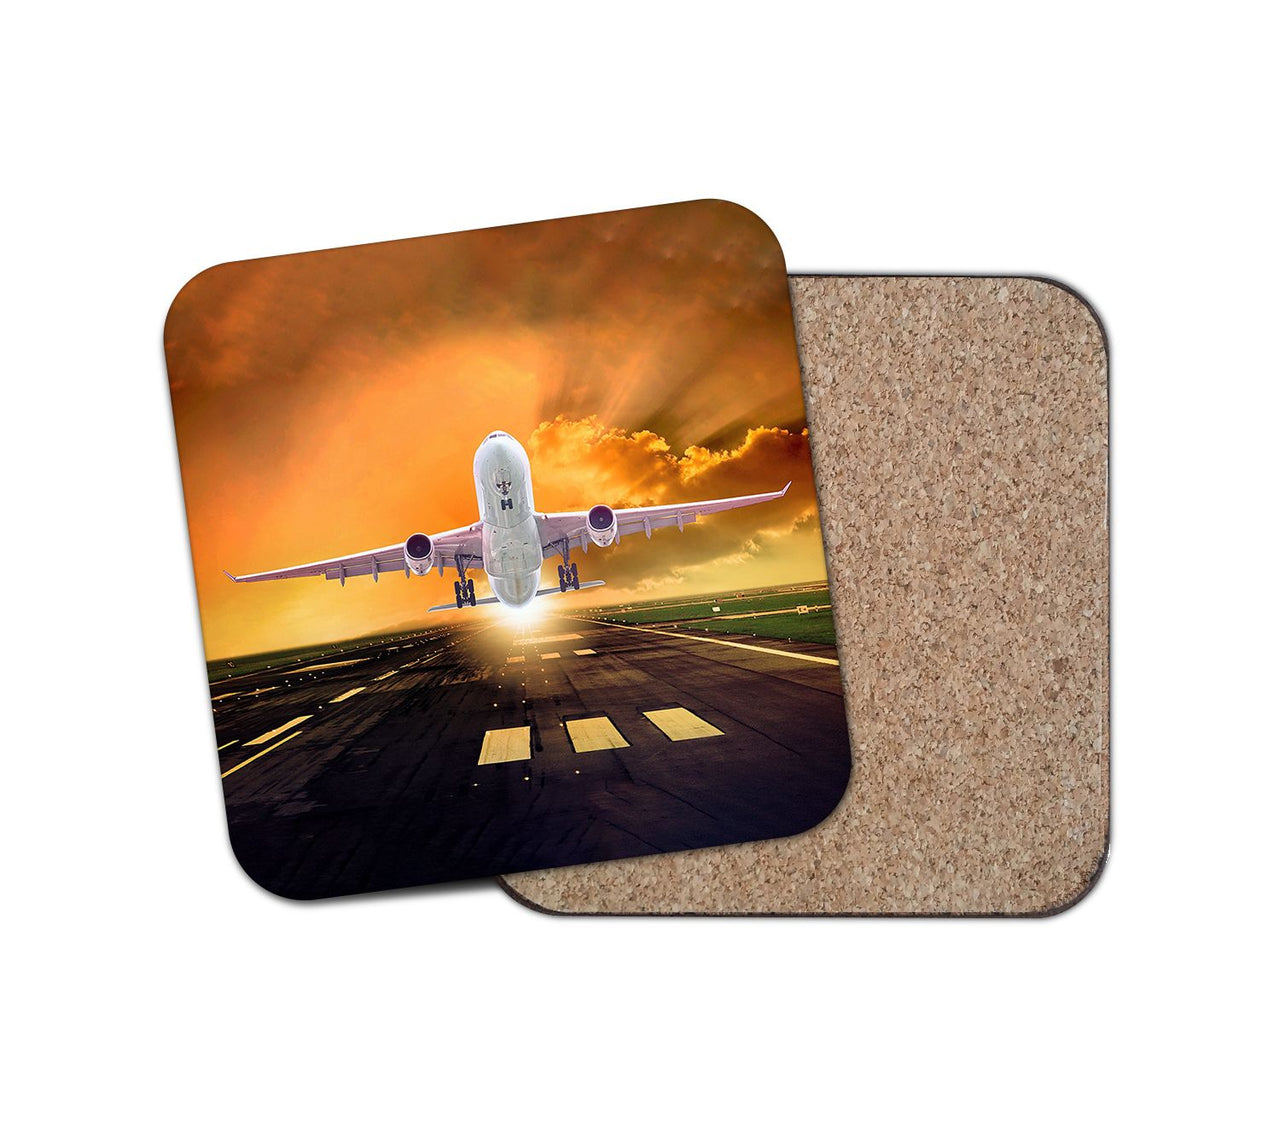 Amazing Departing Aircraft Sunset & Clouds Behind Designed Coasters